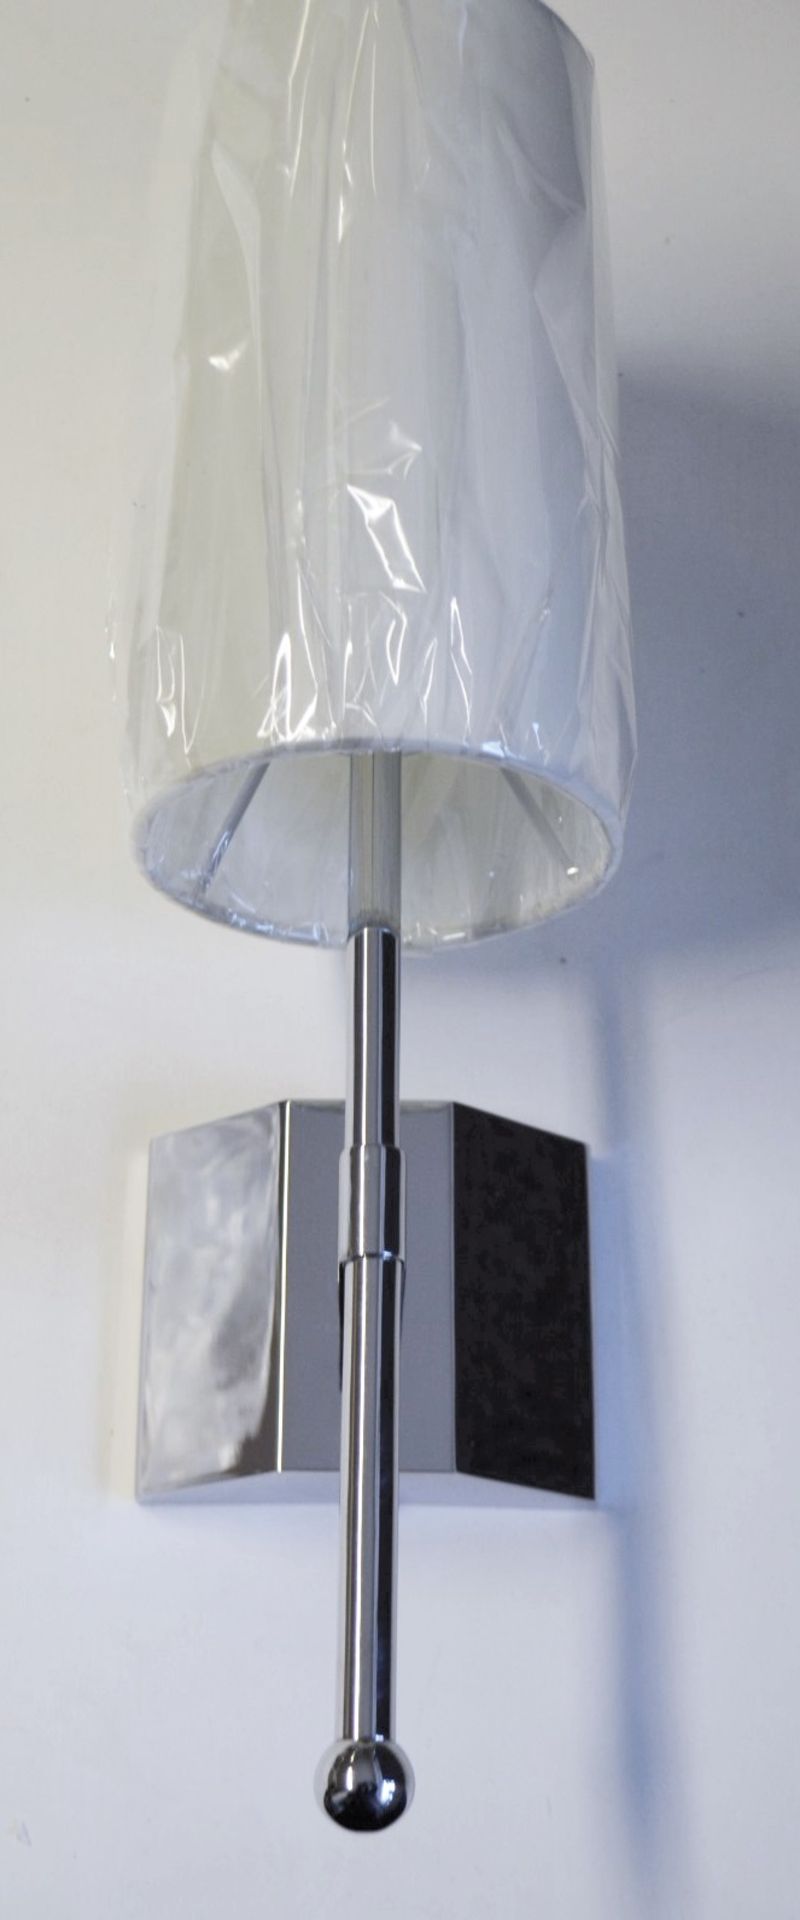 1 x CHELSOM Wall Light In A Chrome Finish With A Silk Shade - Unused Boxed Stock - Dimensions: - Image 2 of 5